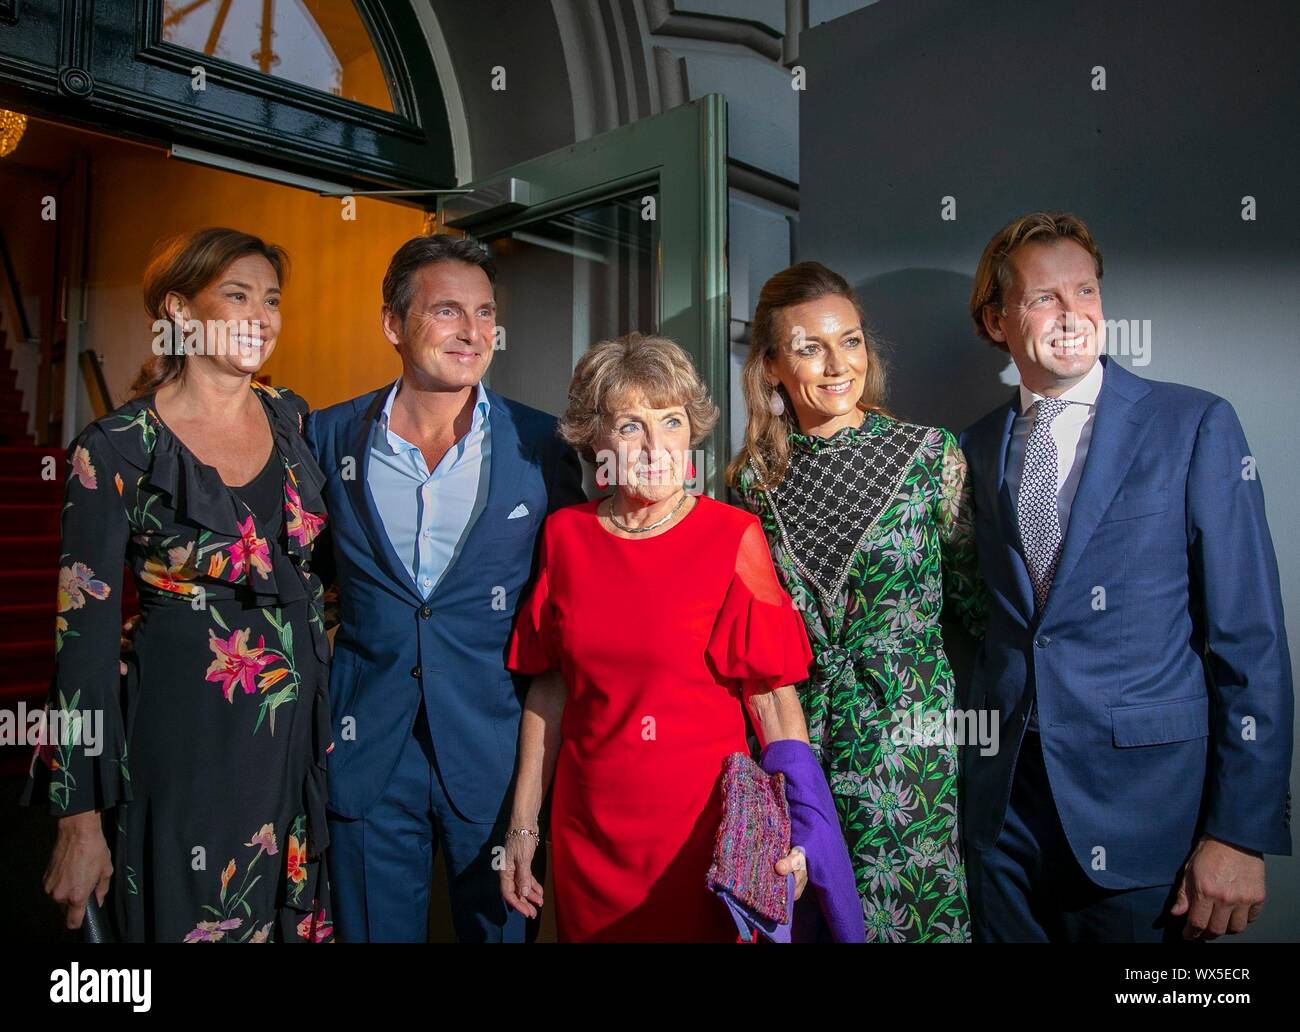 Amsterdam, Netherlands. 16th Sep, 2019. Princess Margriet of The Netherlands,  Prince Maurits and Princess Marilène, Prince Floris and Princess Aimée  arrive at the Koninklijk Theater Carré in Amsterdam, on September 16, 2019,